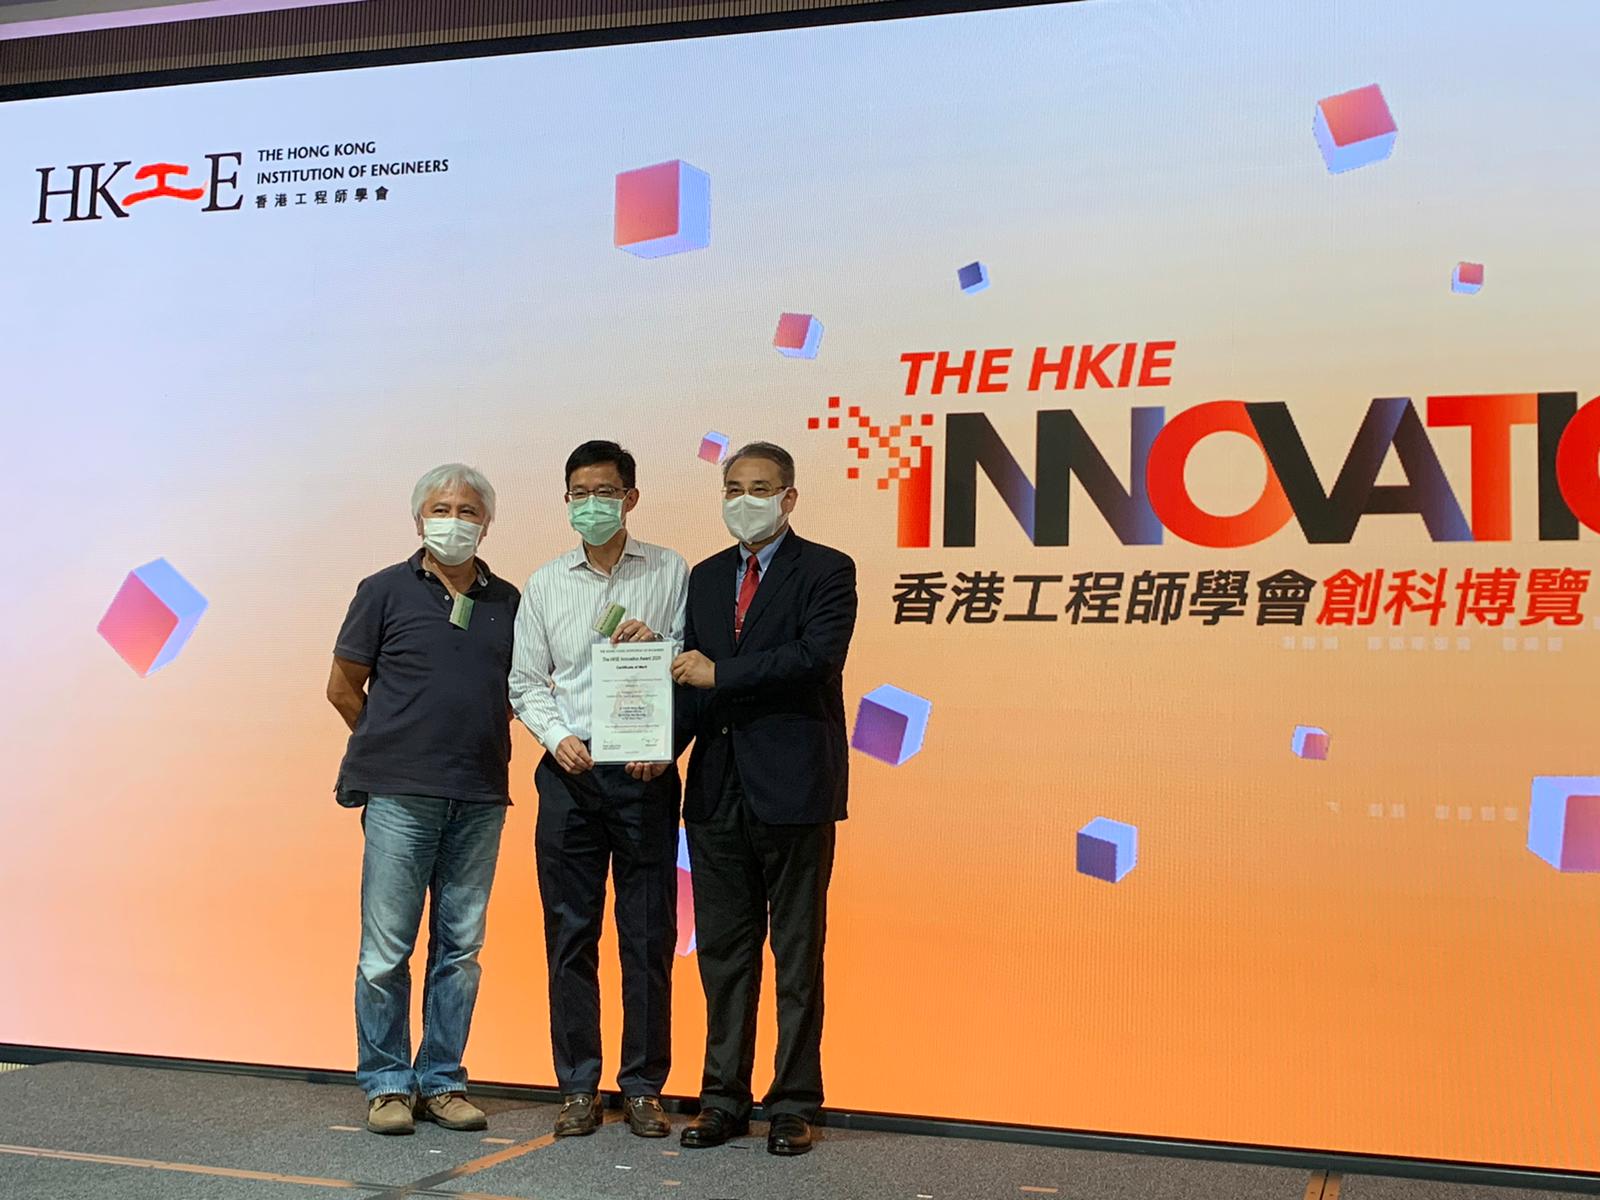 HKIE Innovation Award 2020 - Certificate of Merit (Category II: An Innovative Application of Engineering Theories)